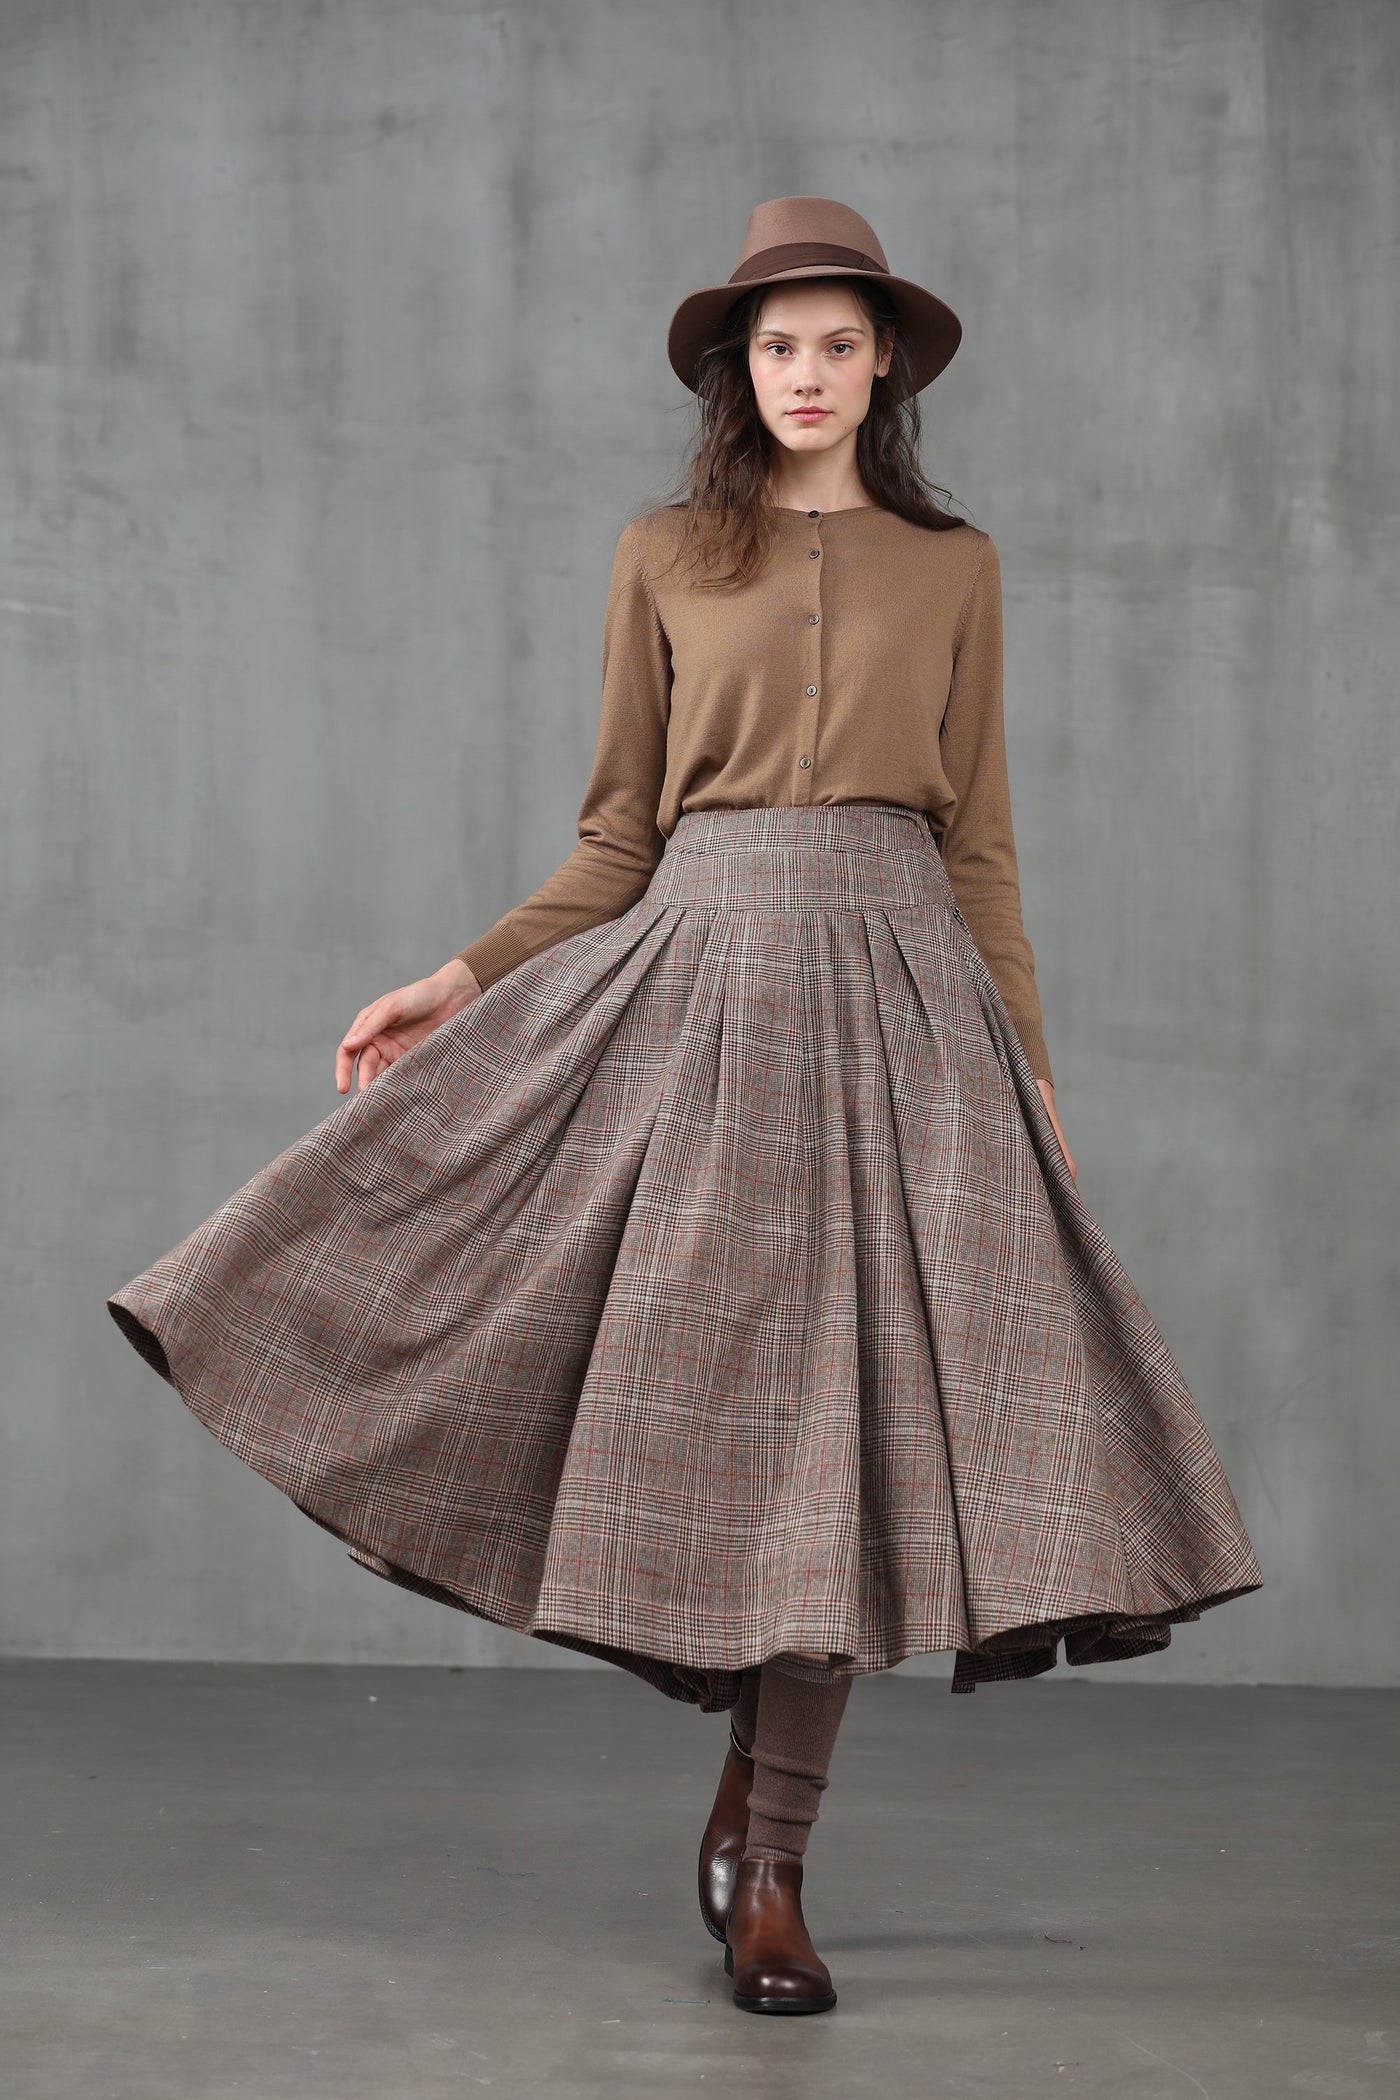 Another 13 | check wool skirt